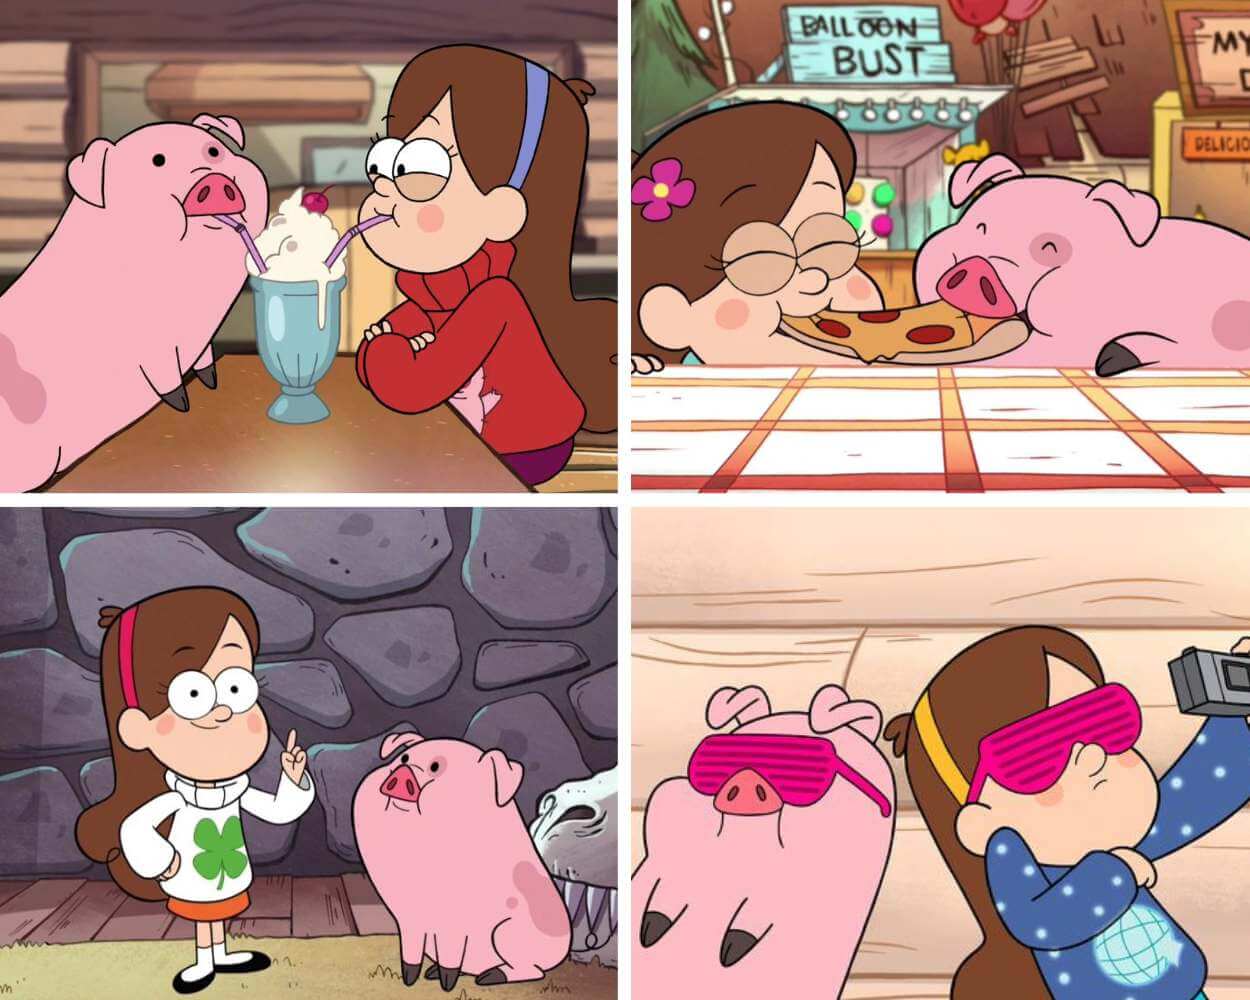 Mabel and Waddles